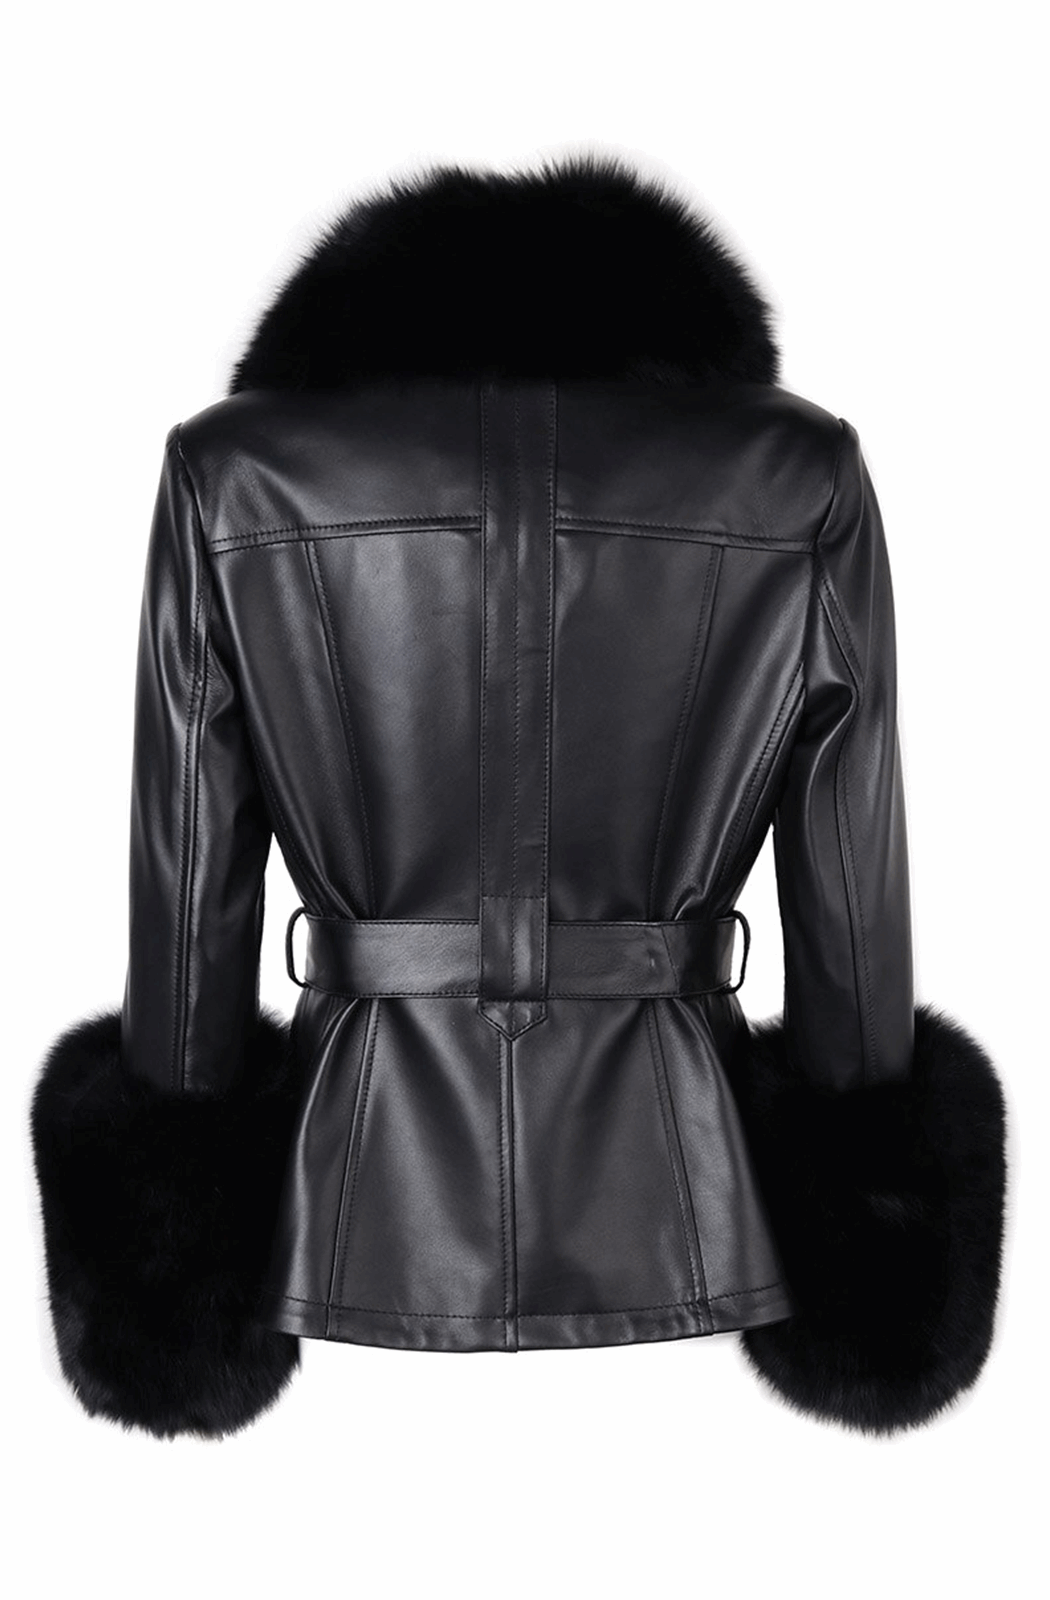 Leather jacket with fur collar and cuffs